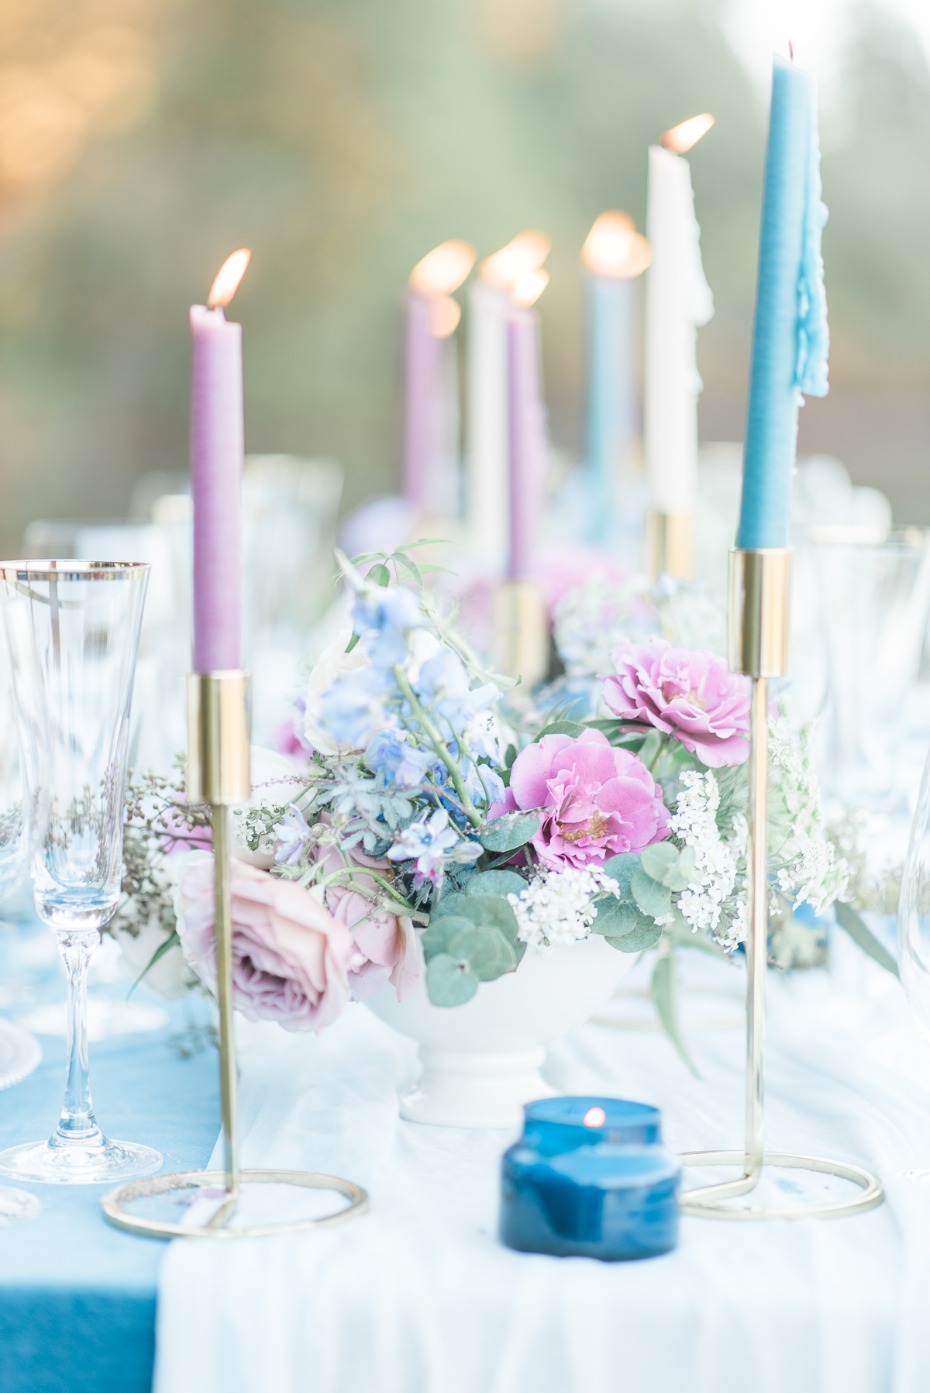 Elegant centerpiece in blue and pink